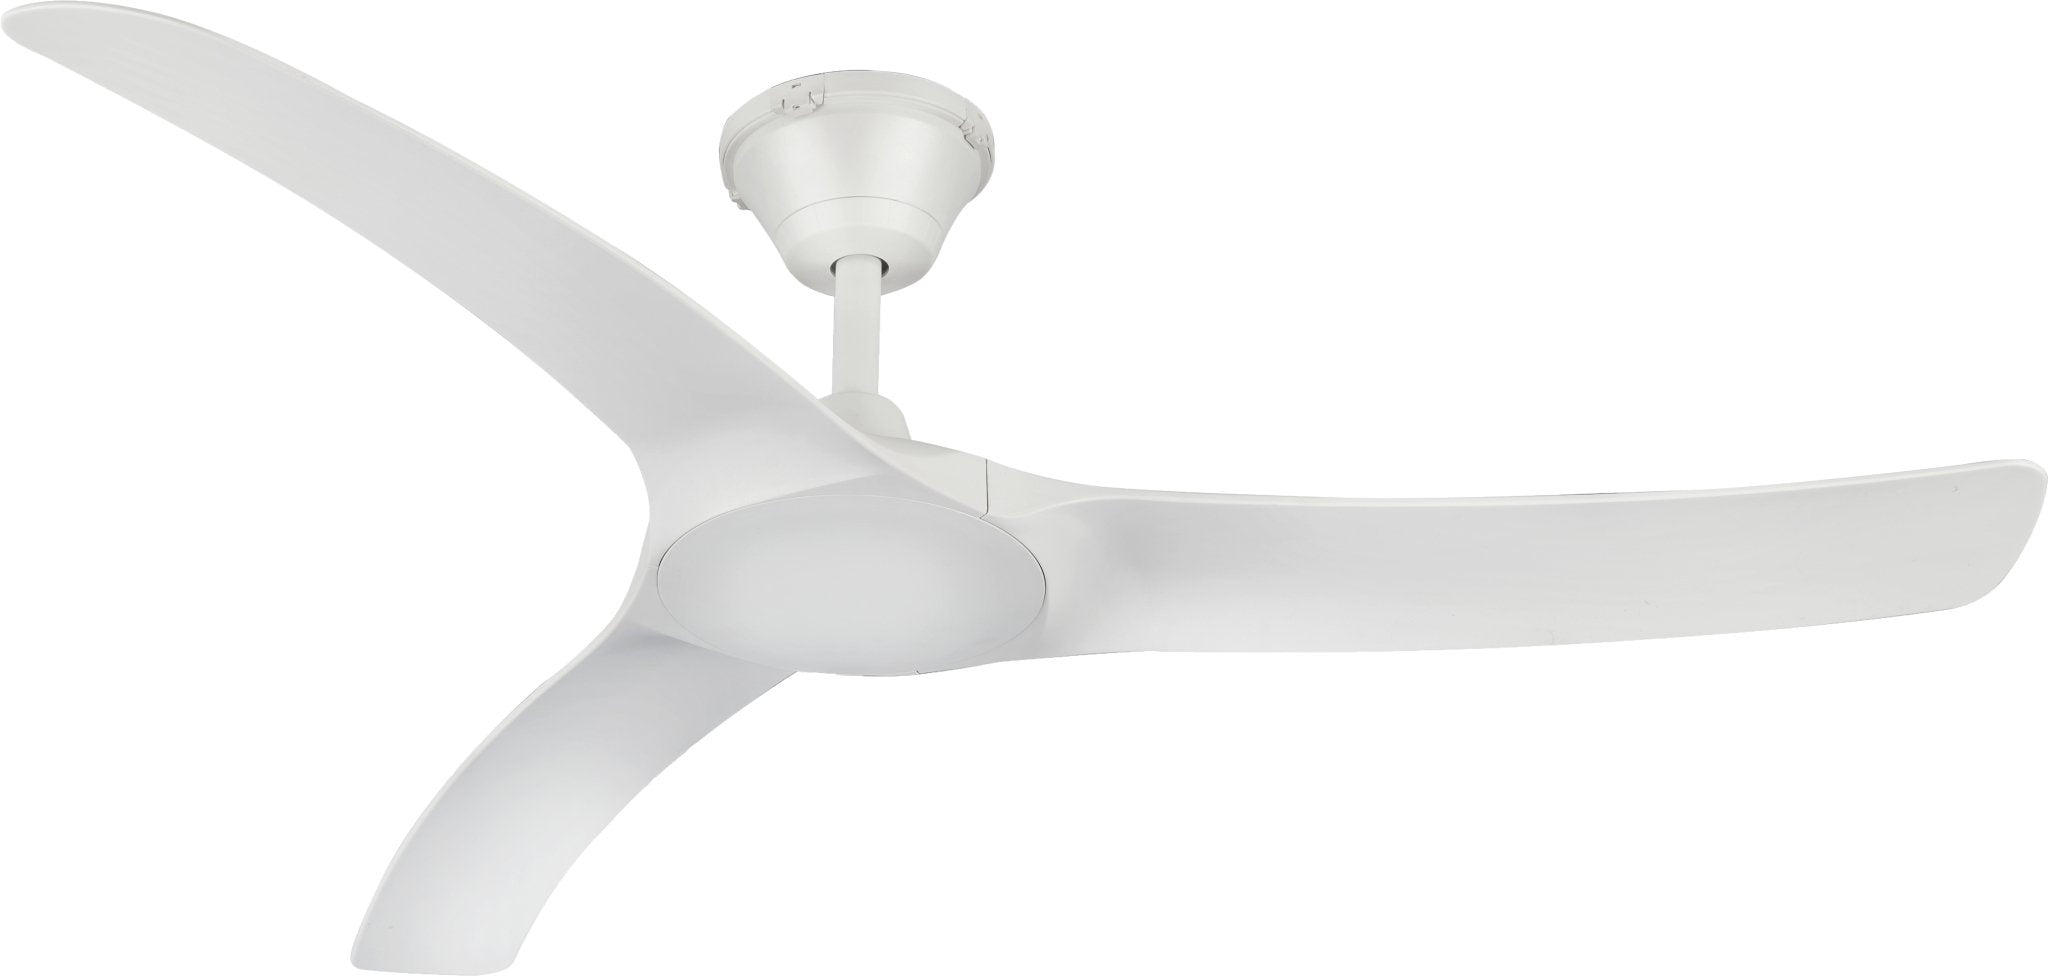 Aqua V2 DC IP66 Rated Ceiling Fan with Remote – White 52″ by Hunter Pacific - Mases LightingHunter Pacific